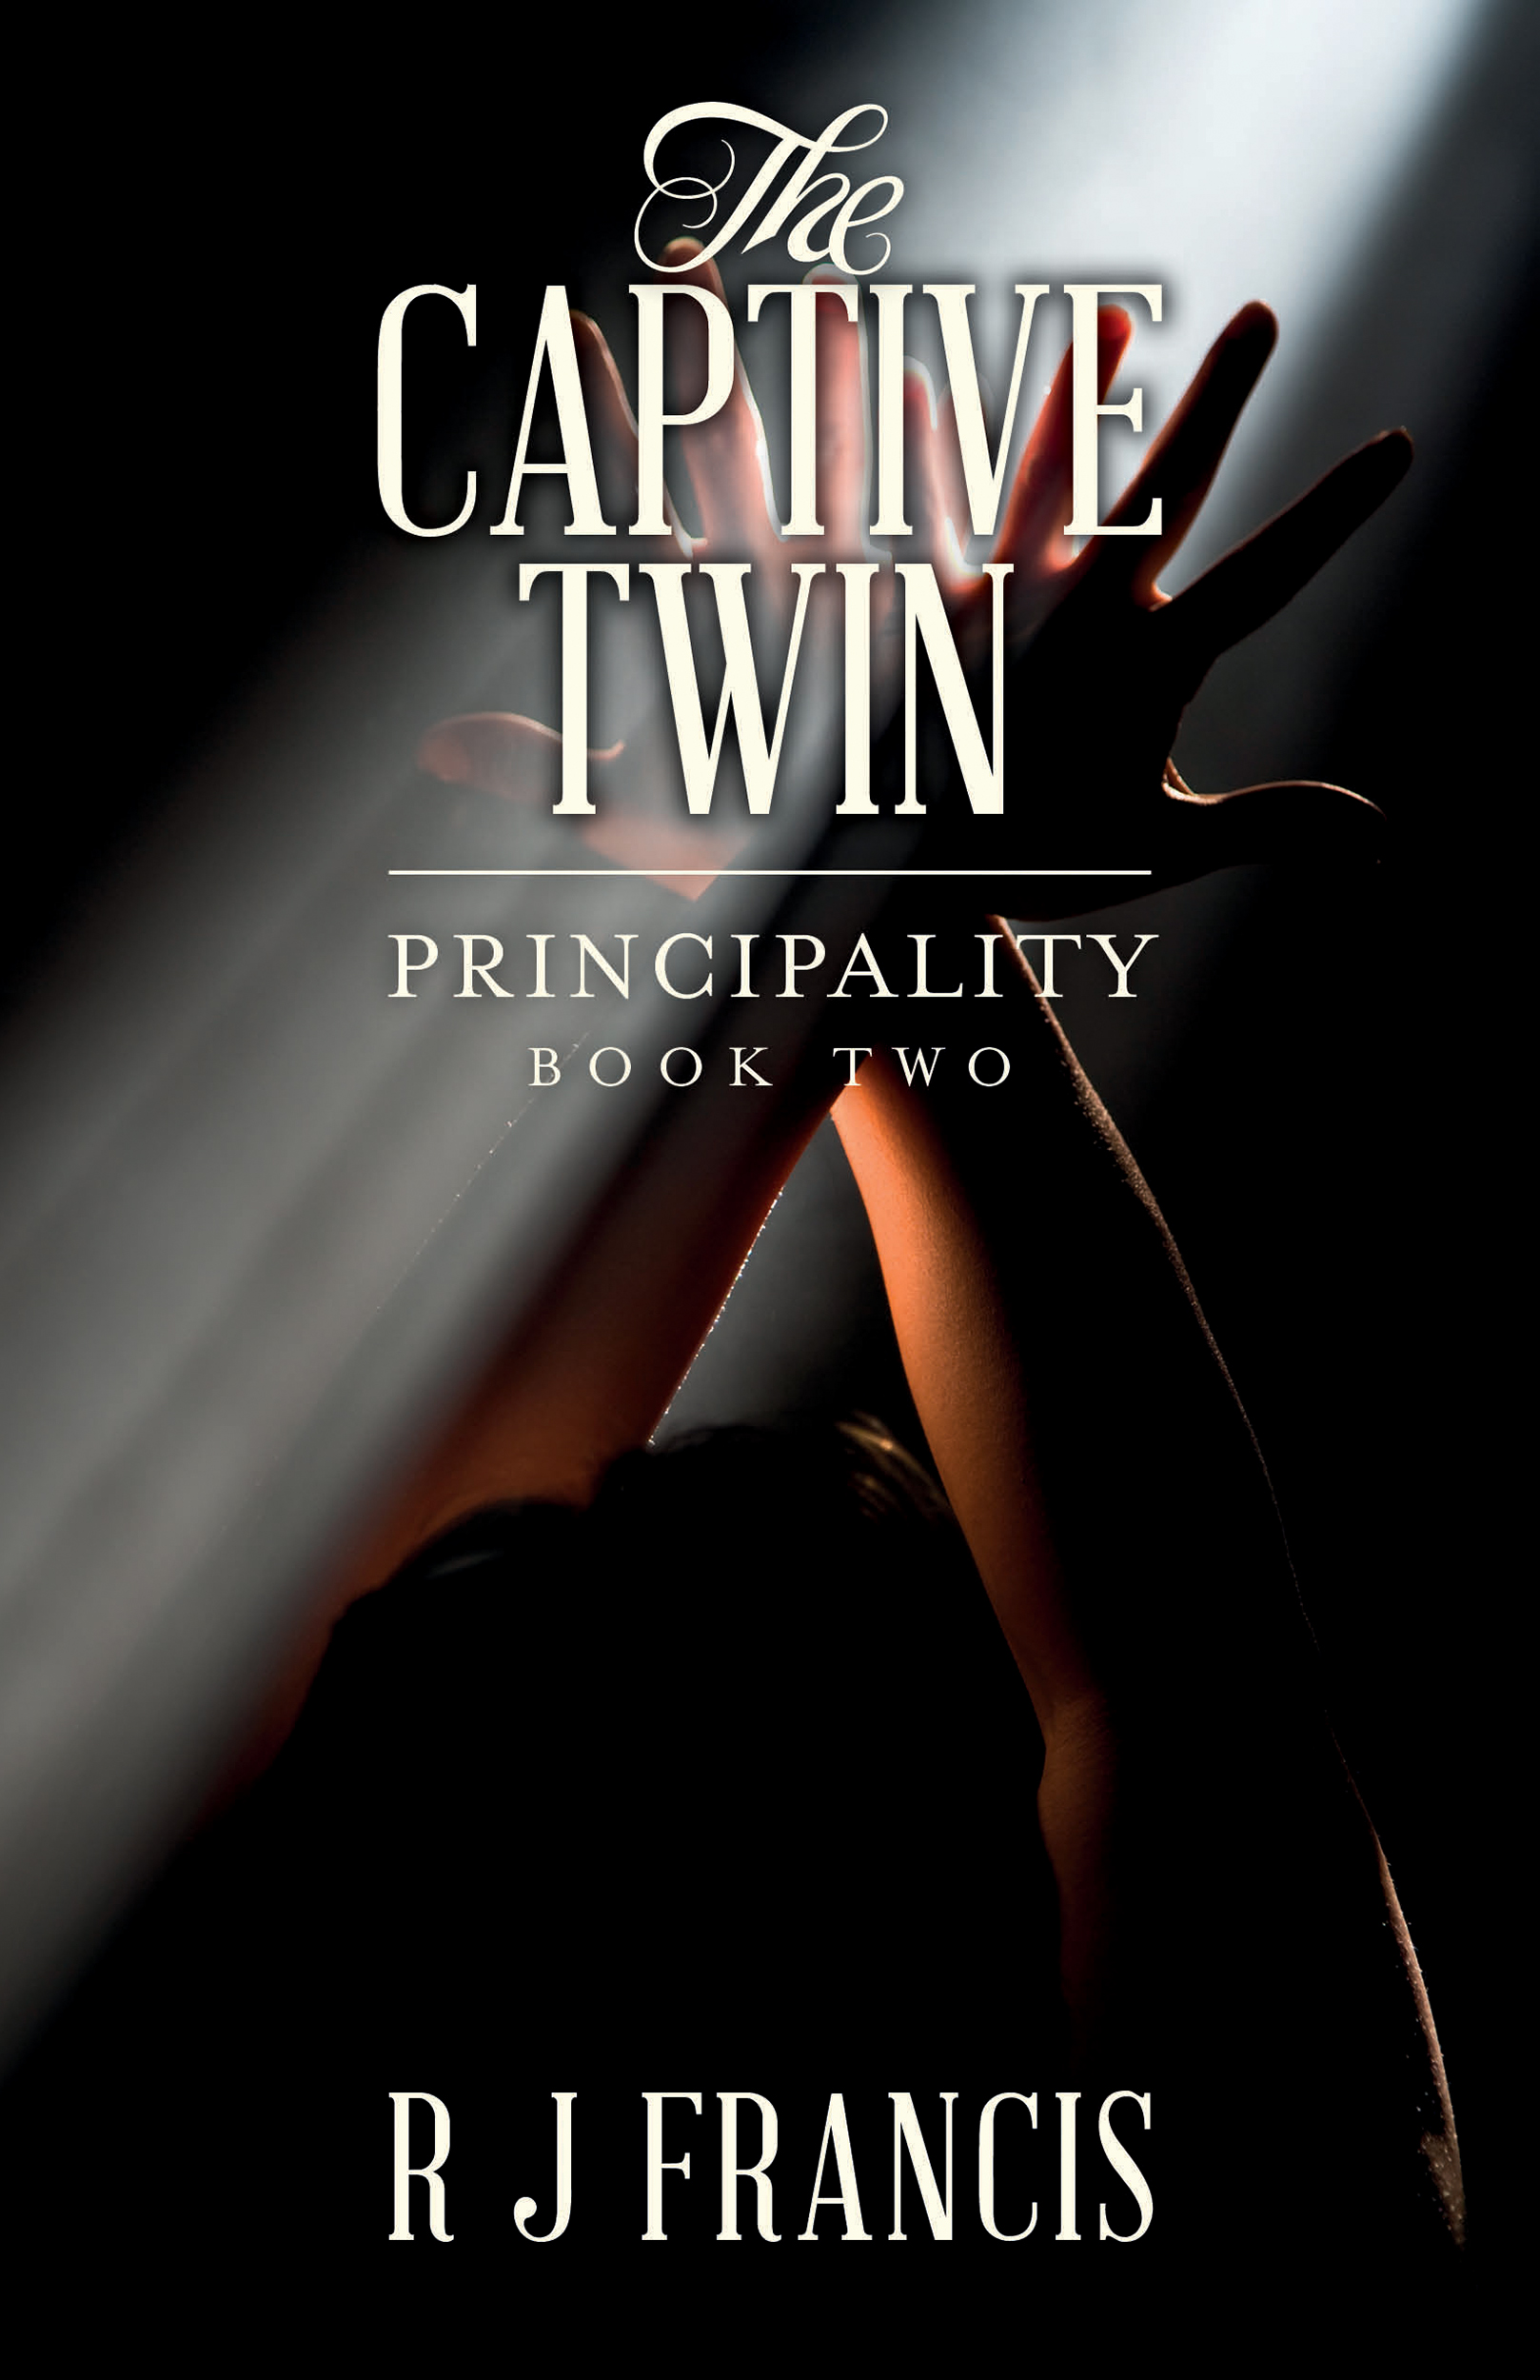 FREE: The Captive Twin by R J Francis